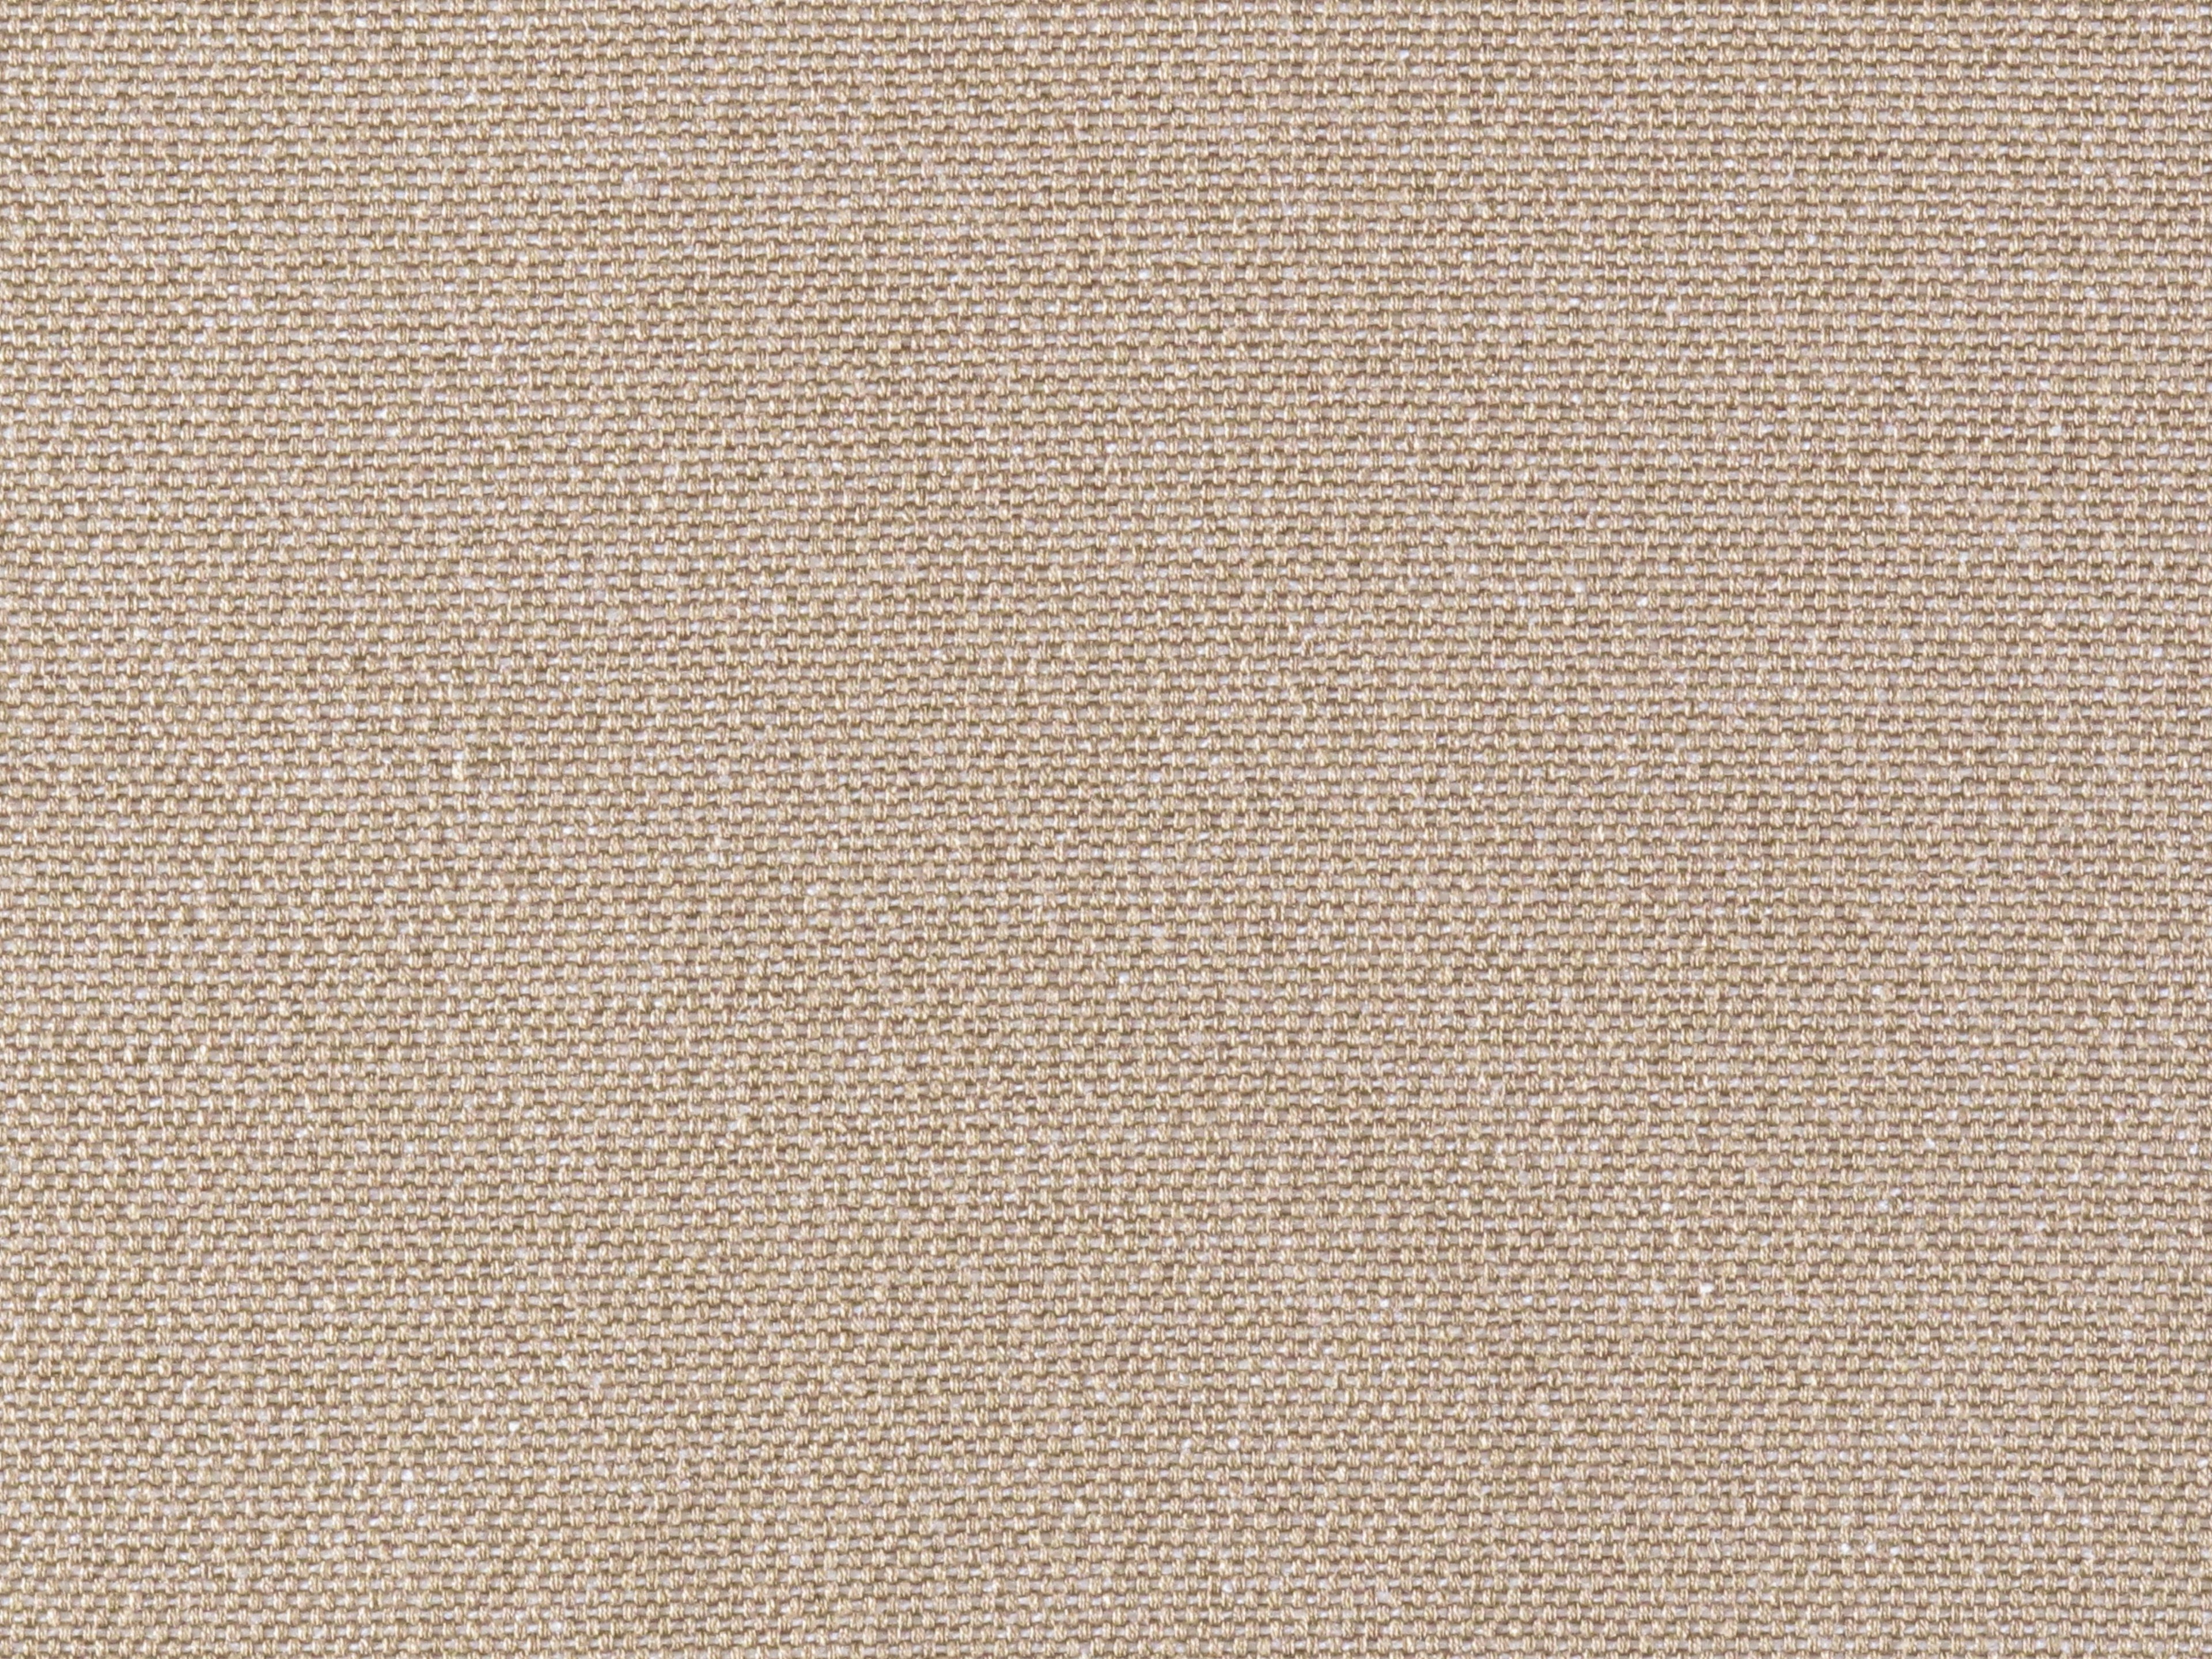 Valverde fabric in tan color - pattern number L6 0003VALV - by Scalamandre in the Old World Weavers collection